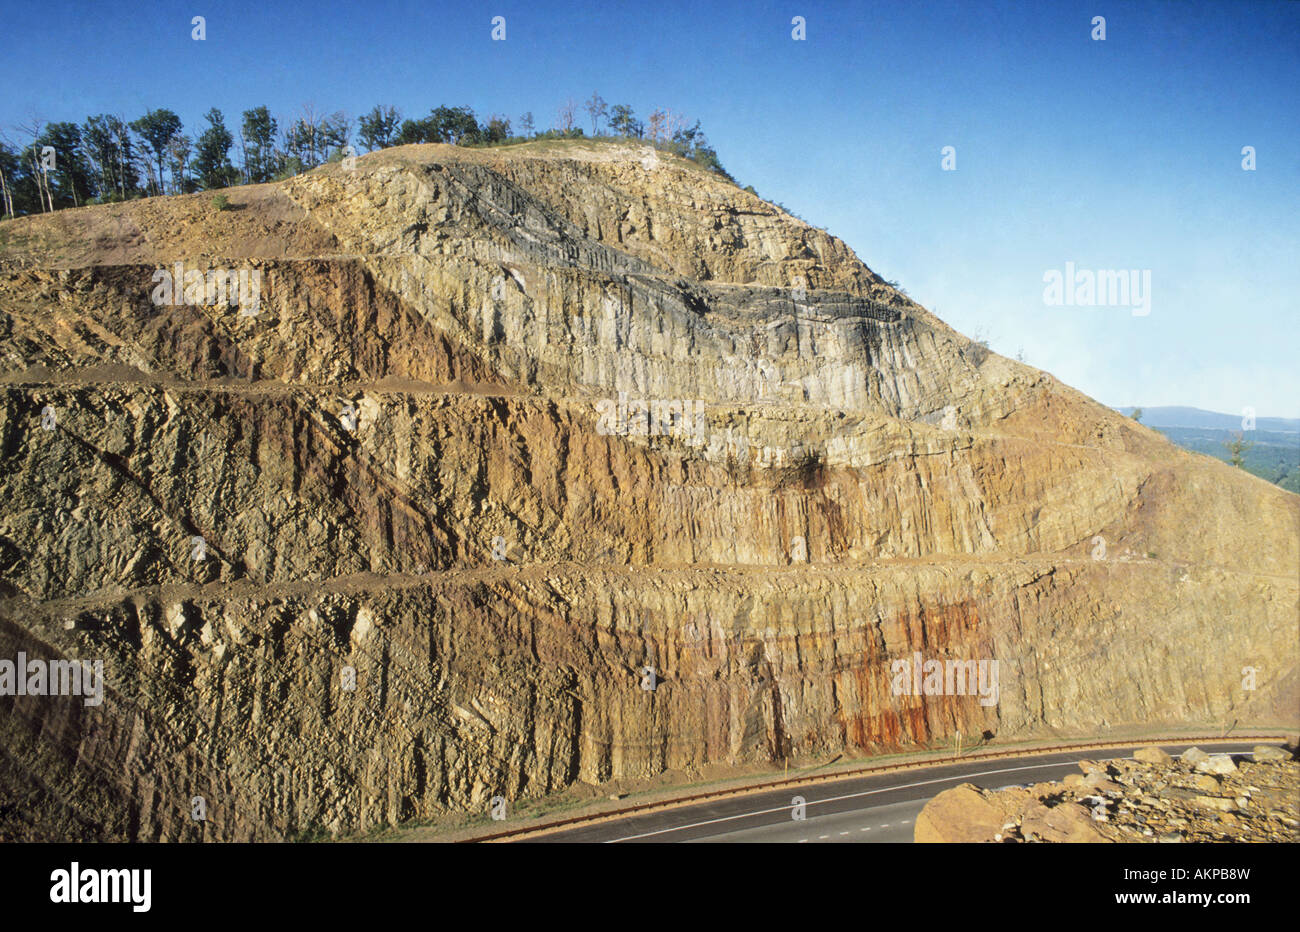 Rock layers in road cut of mountain geology rock stratification Maryland USA Appalachian Mountains Stock Photo